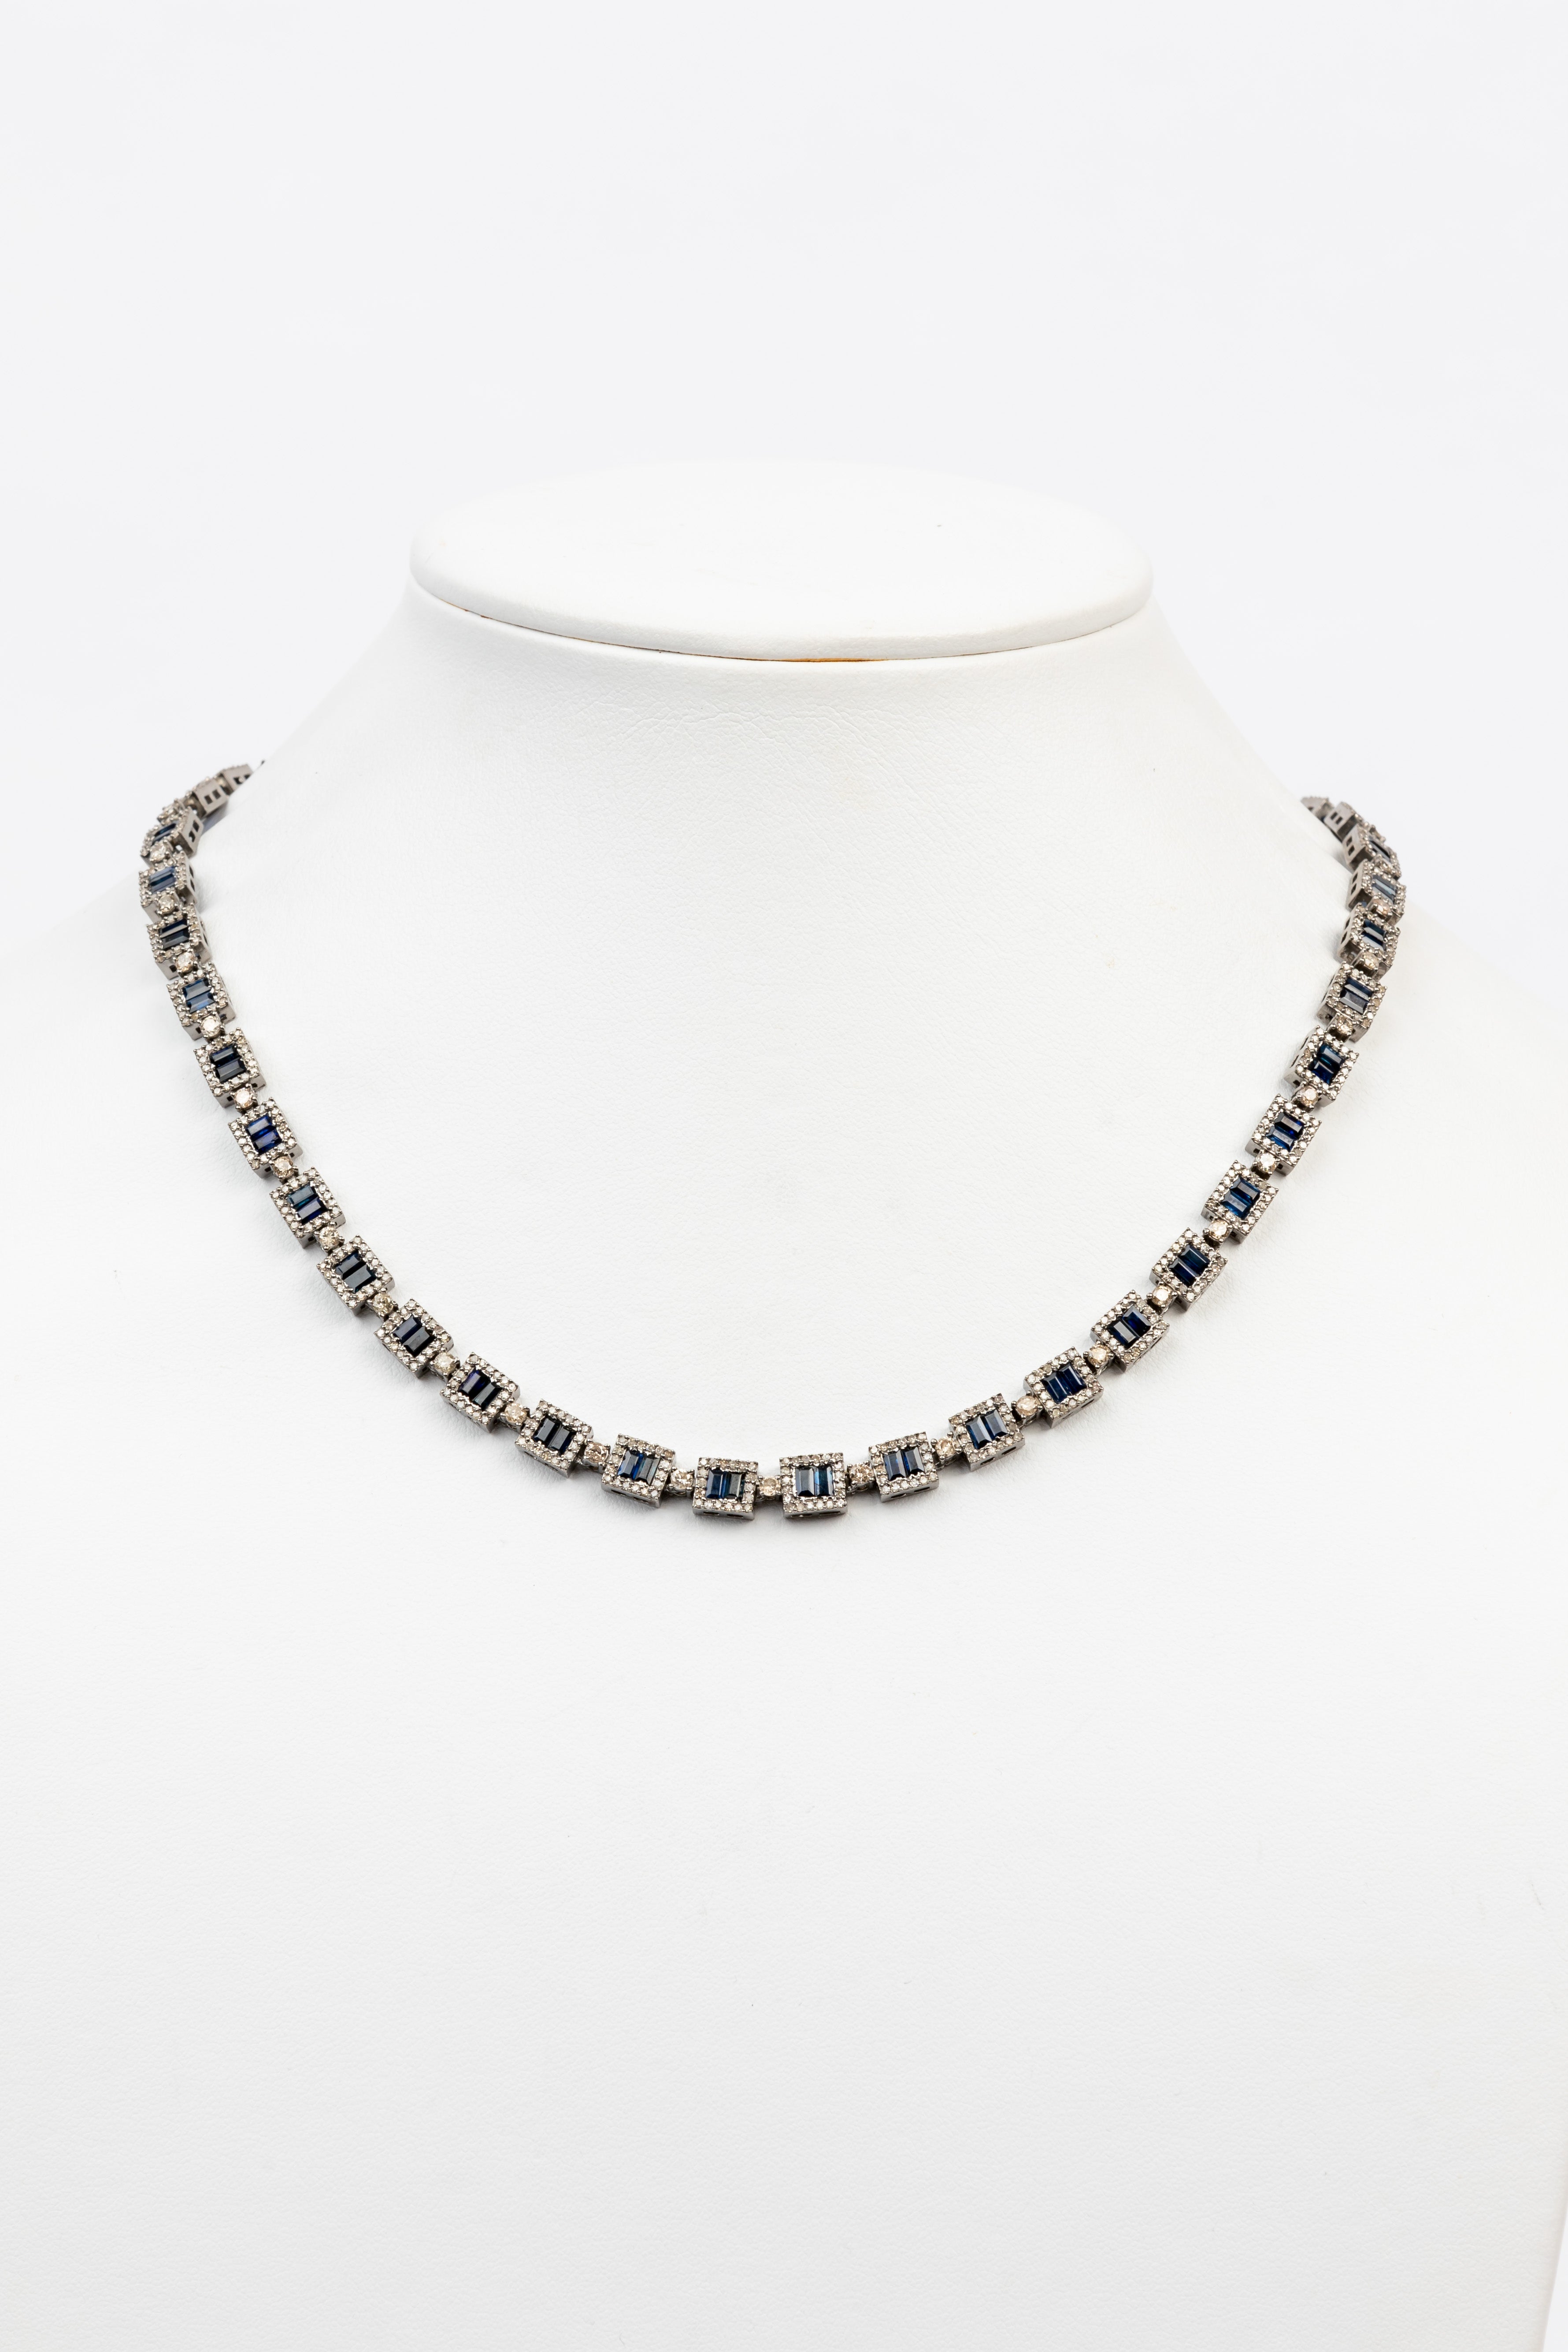 Diamond and Sapphire Baguette Necklace